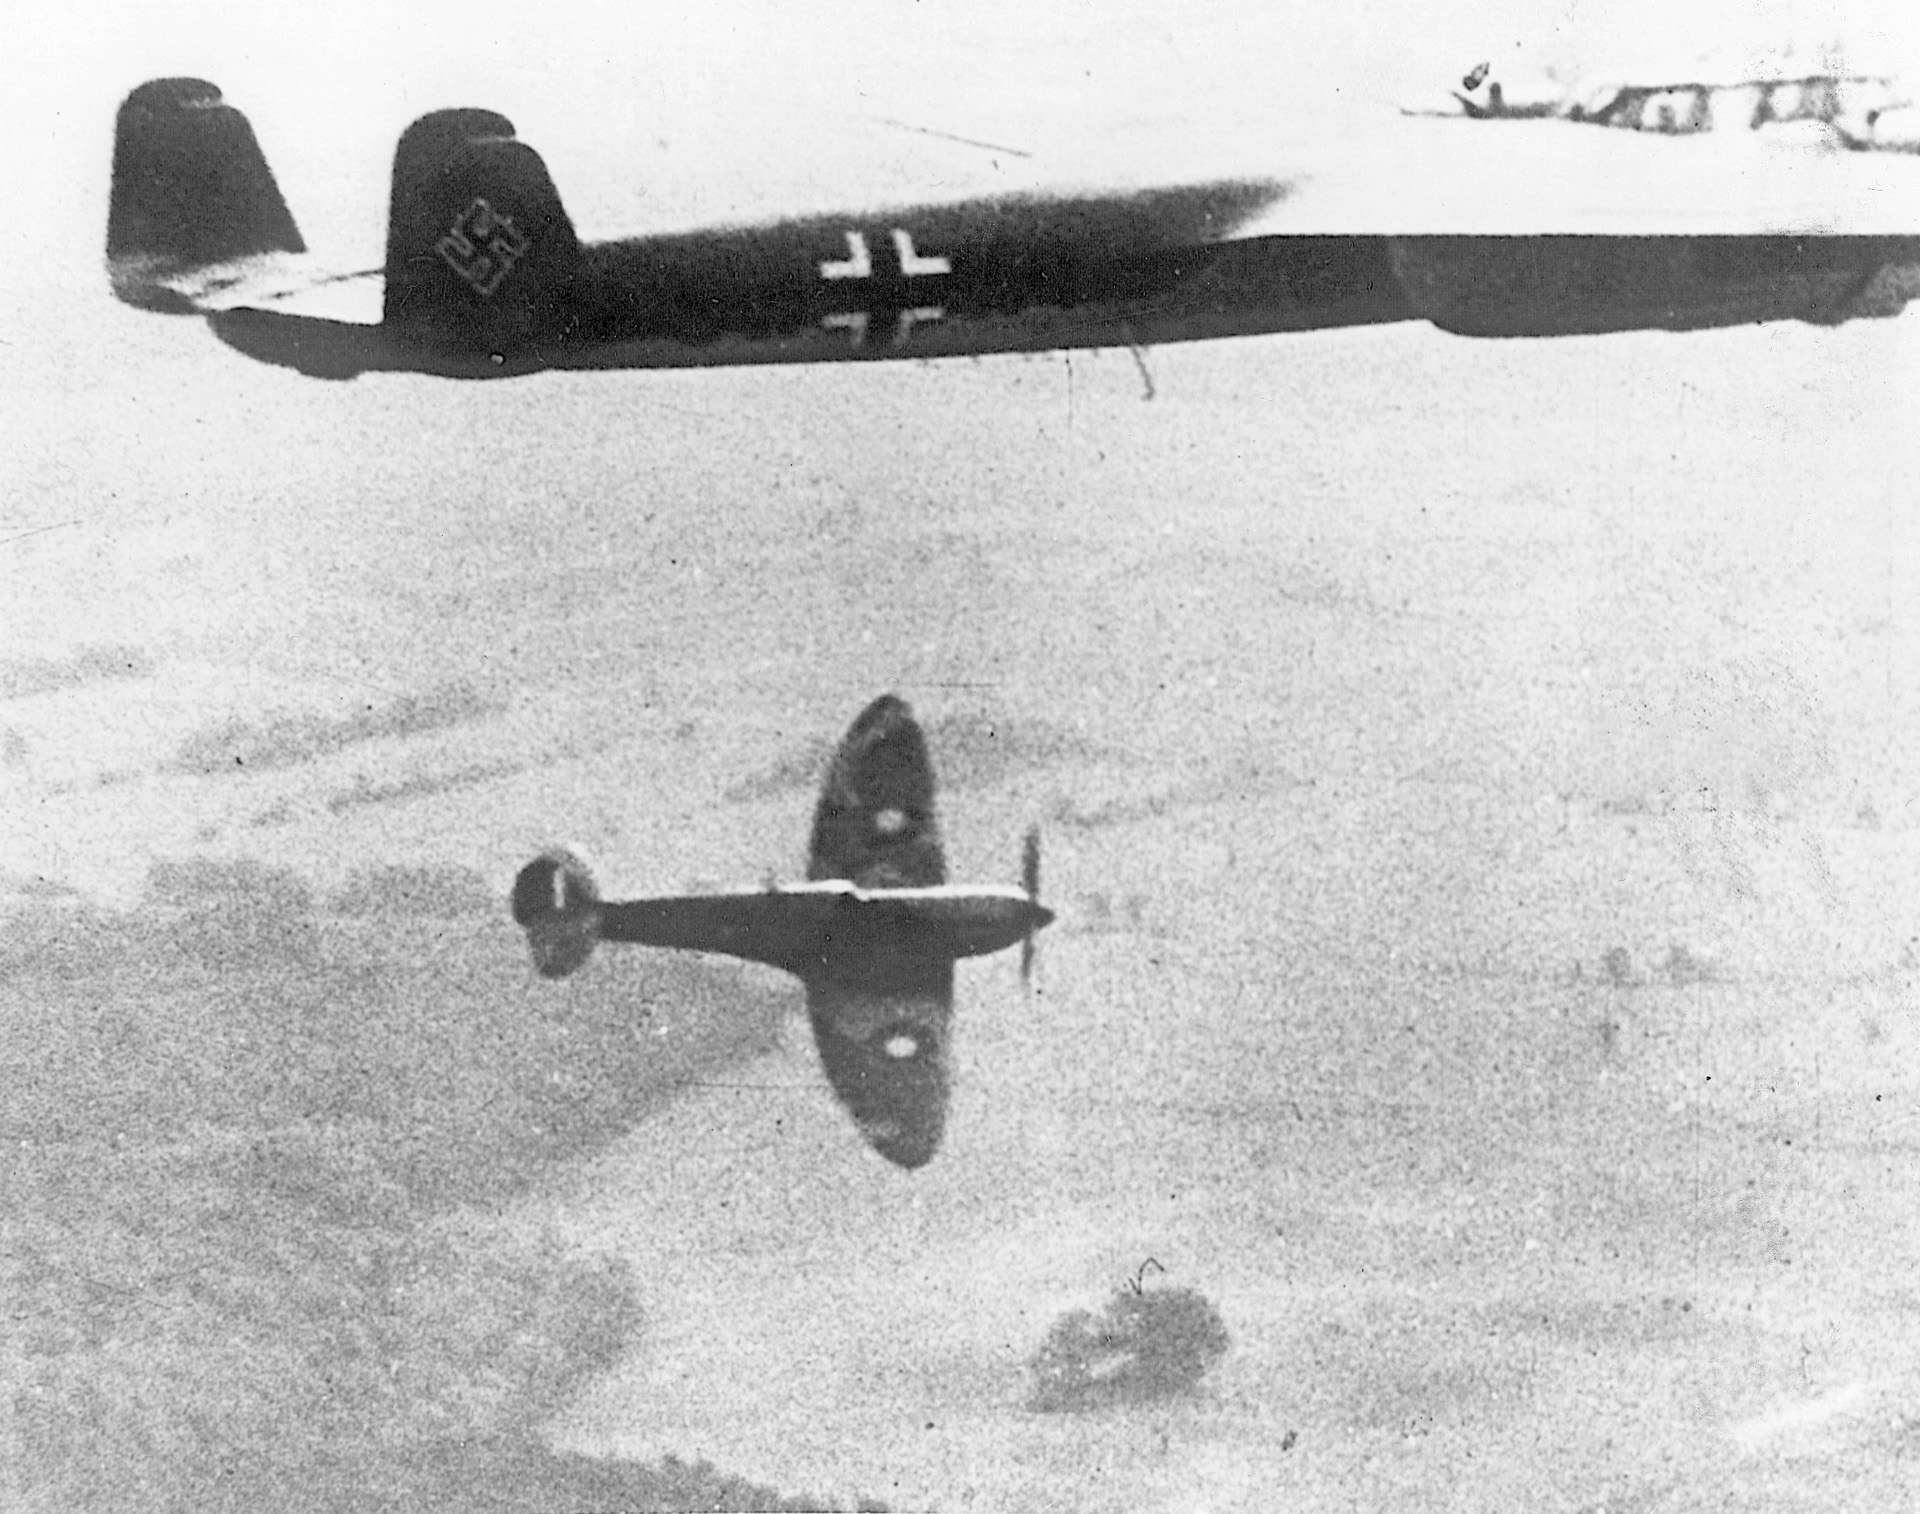 A Spitfire swoops past a Dornier-17 bomber. The Do-17s were nearing obsolescence in the summer of 1940, but the Germans threw them into the fight in hopes of overwhelming the British resistance.